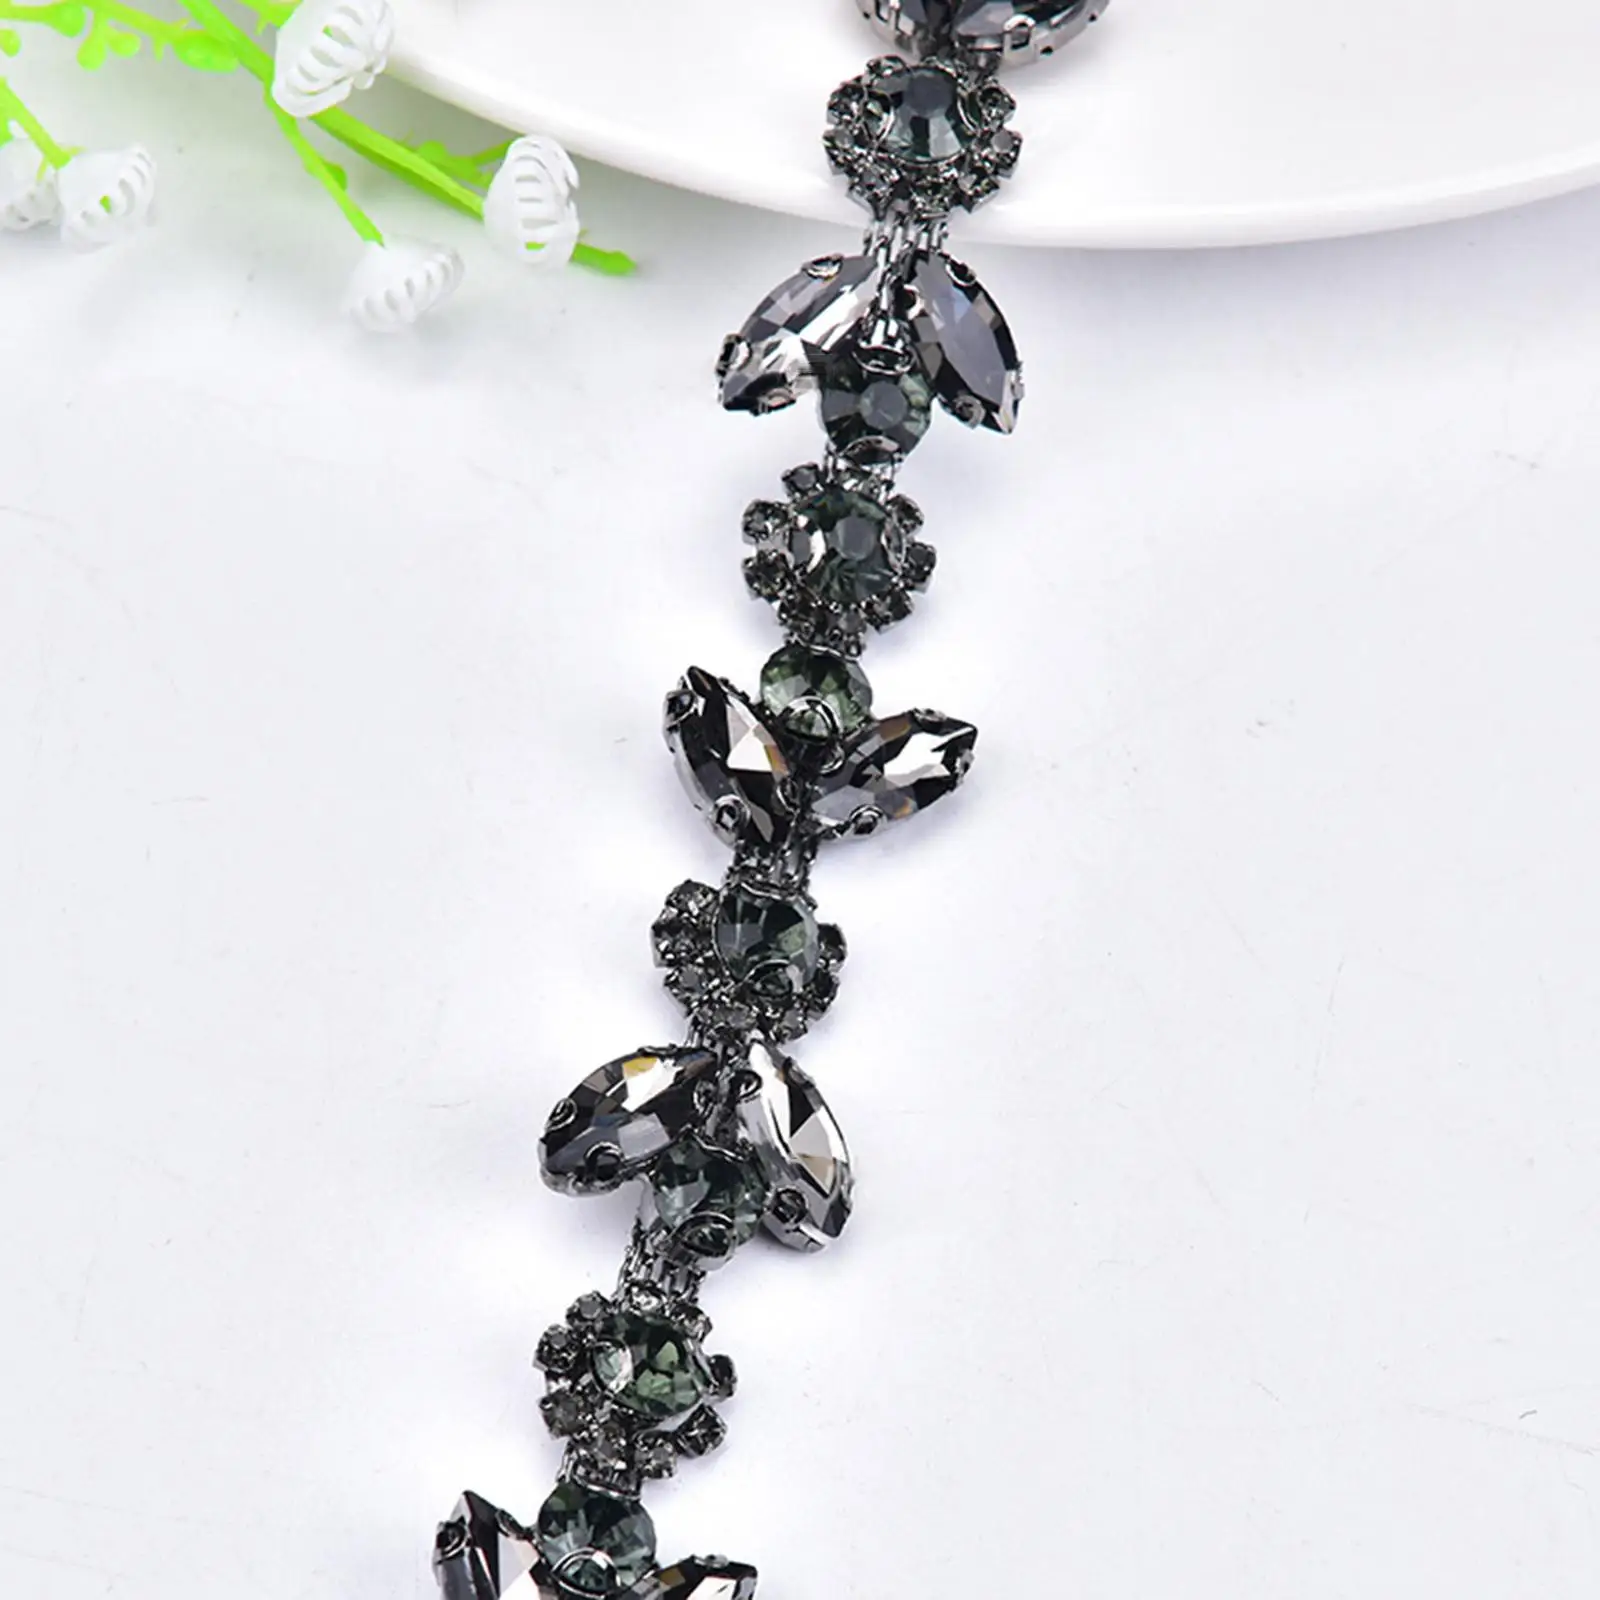 Delicate Rhinestone Trim Beaded Belt Sew On Embellishment Jewelry Rhinestone Chain Decor for Clothes Patch Shoes Wedding Costume